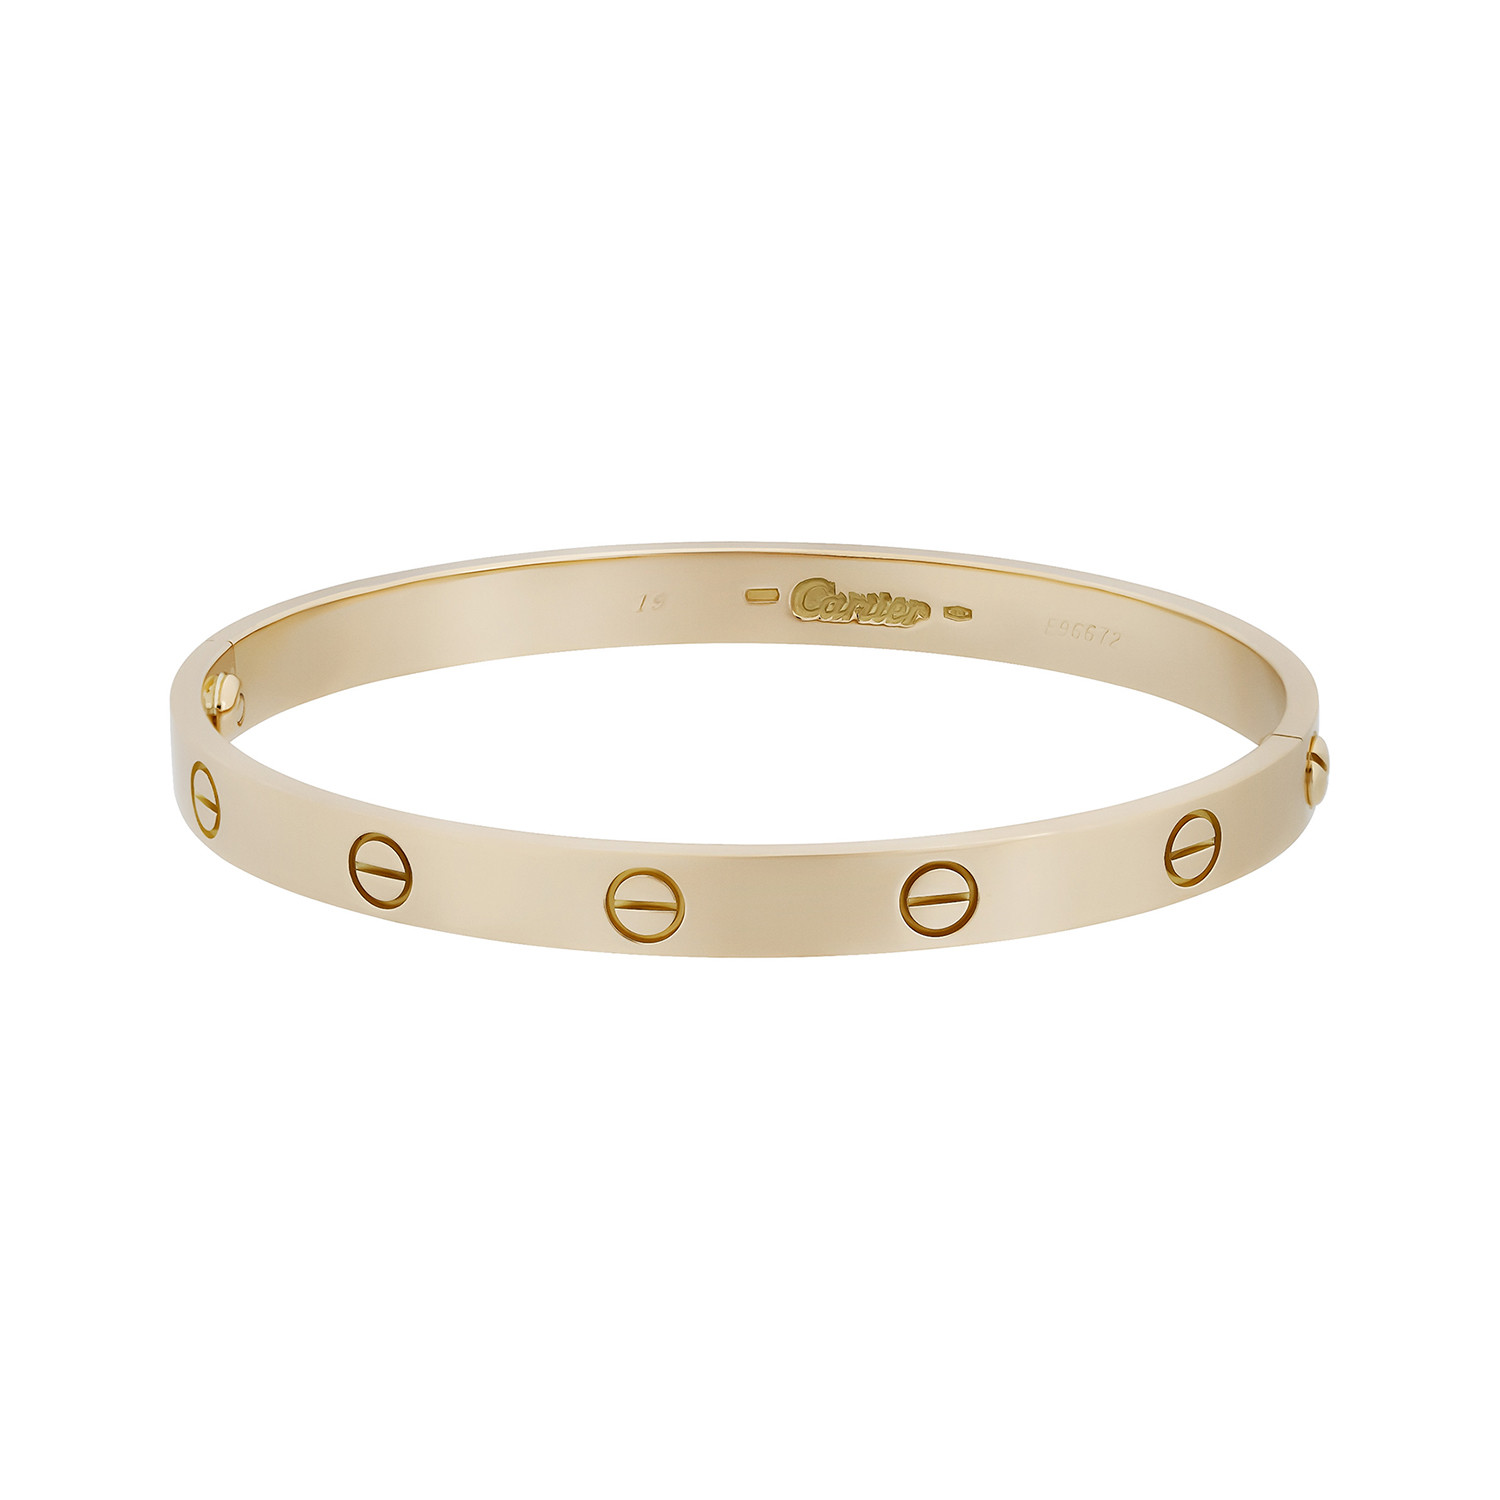 Cartier 18k Yellow Gold Love Bracelet // Pre-Owned - Show-Stopping ...